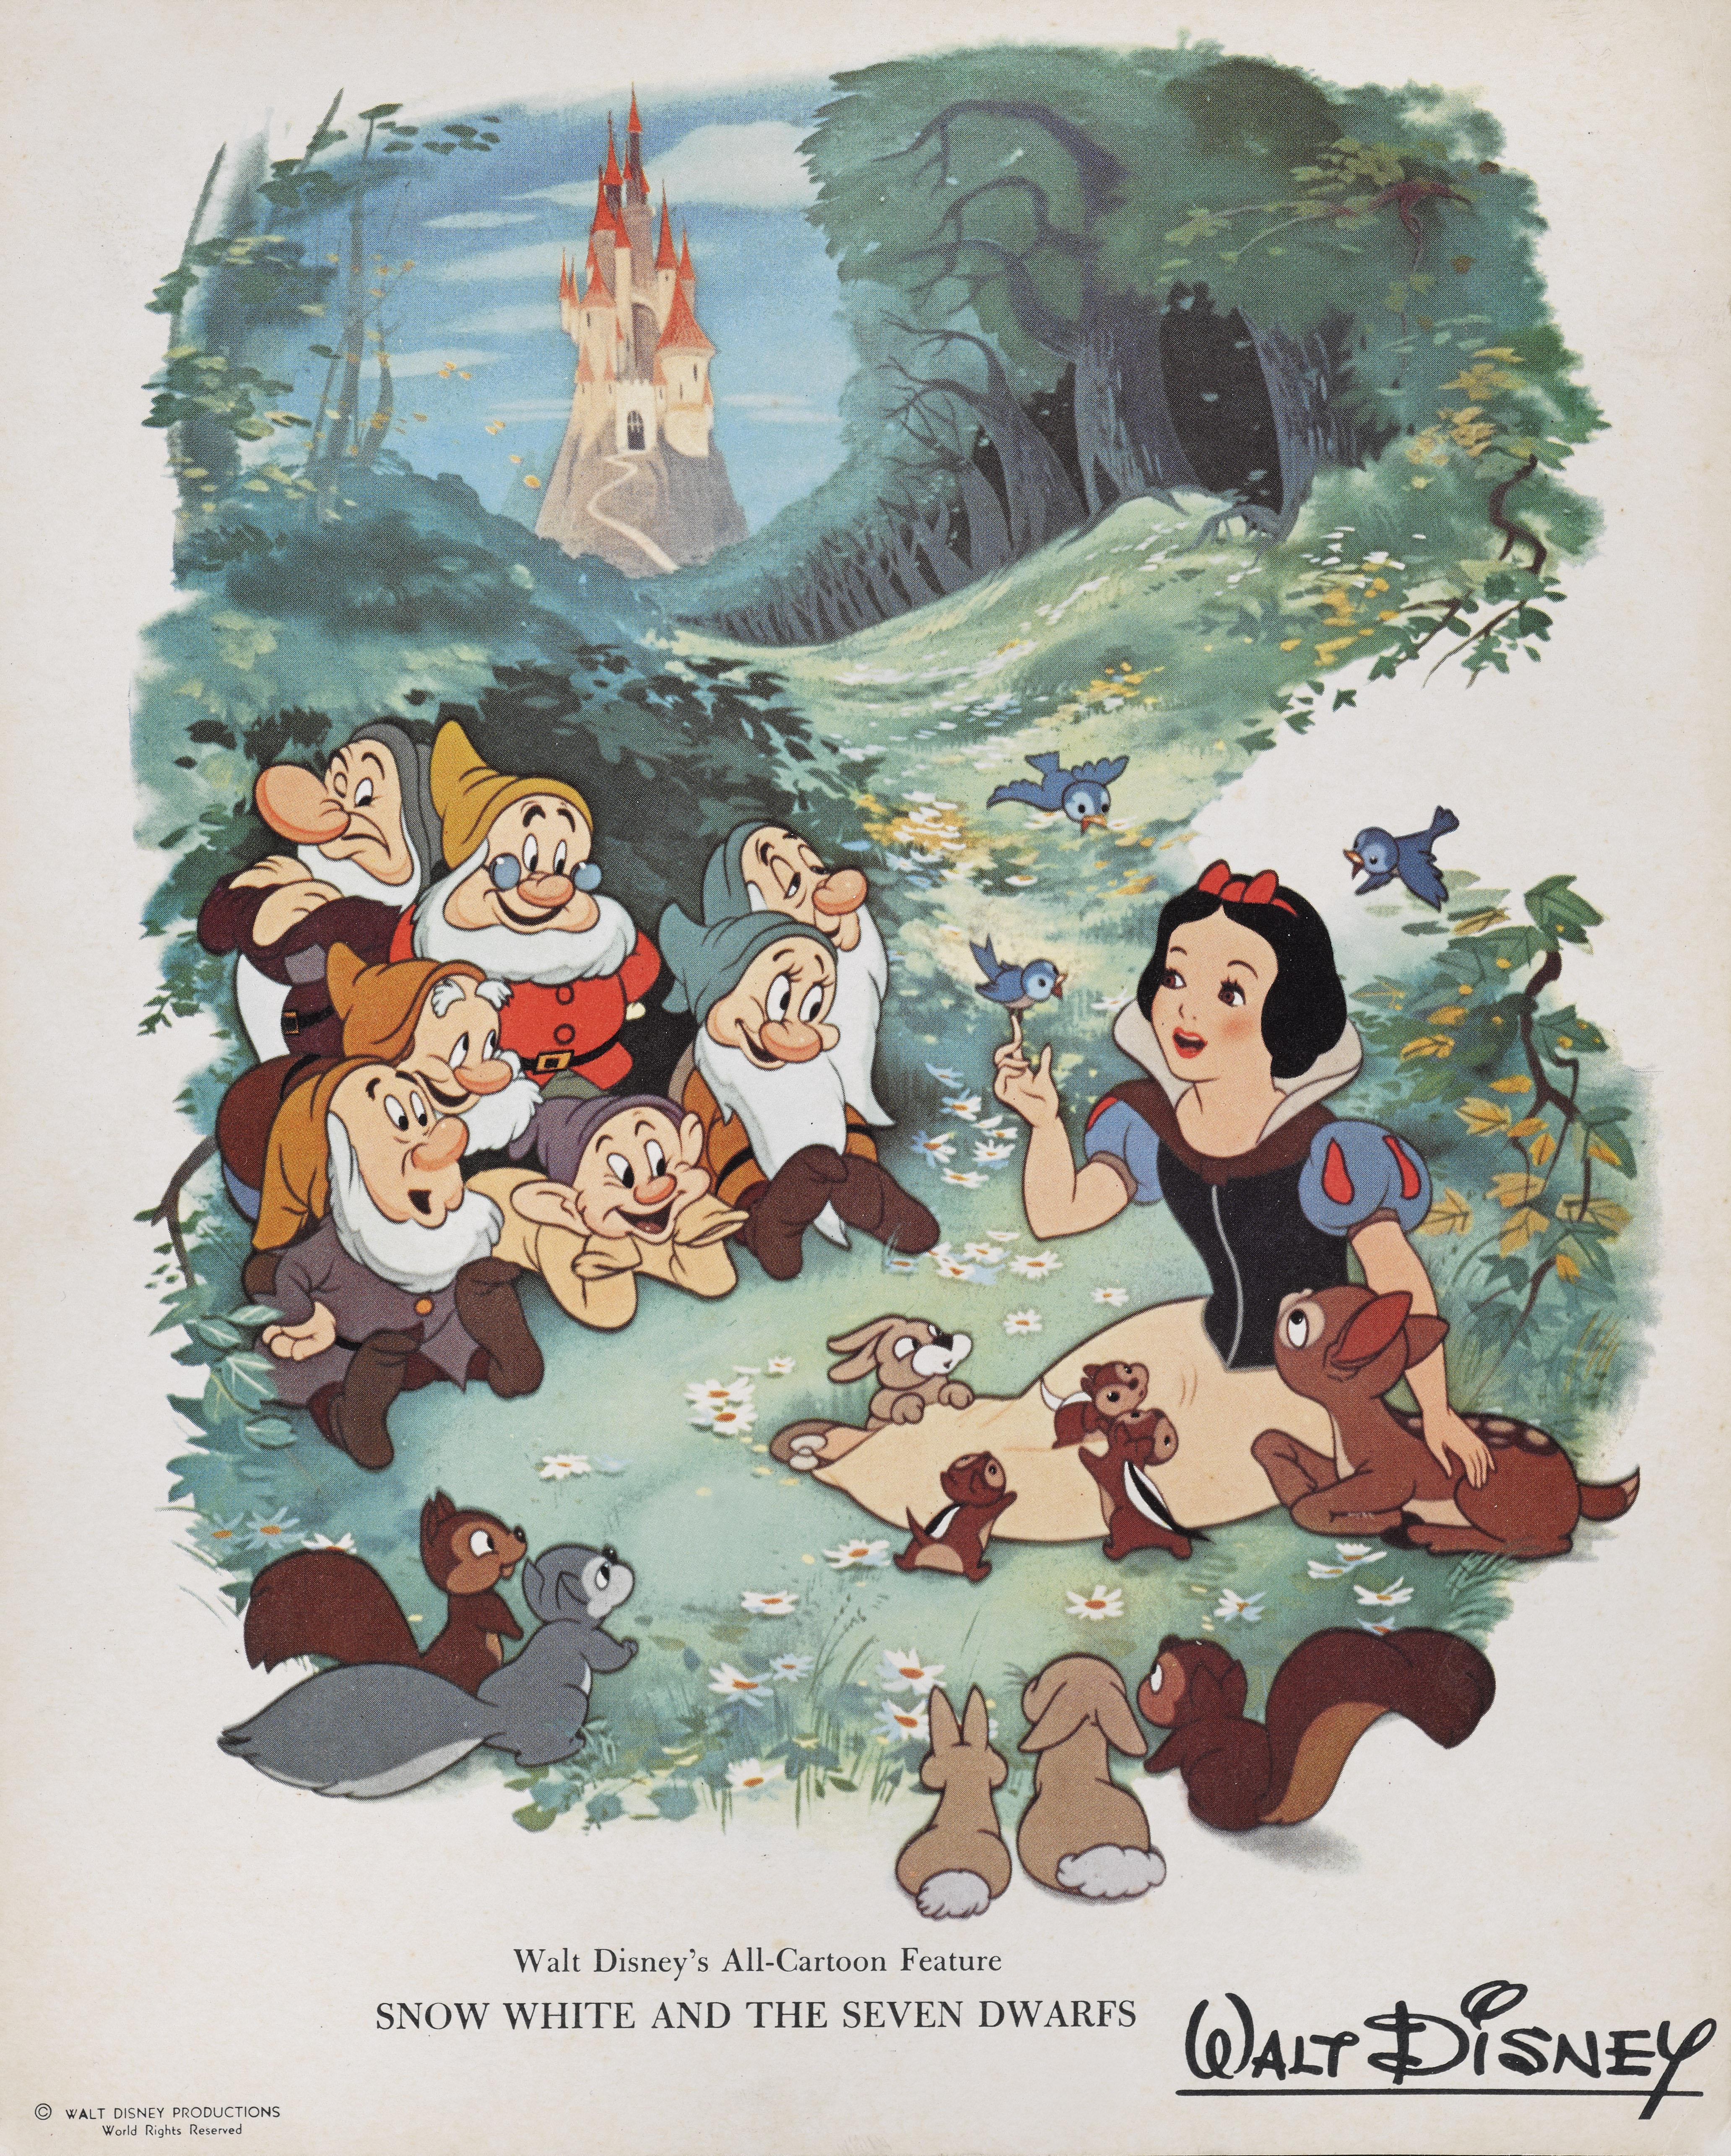 Original US trade advertisement for the 1964 re-release of the film poster for the Snow White and the Seven Dwarfs. This was Walt Disney's first feature animation and when it was released in 1937 was welcomed as a magical marvel. Disney estimated